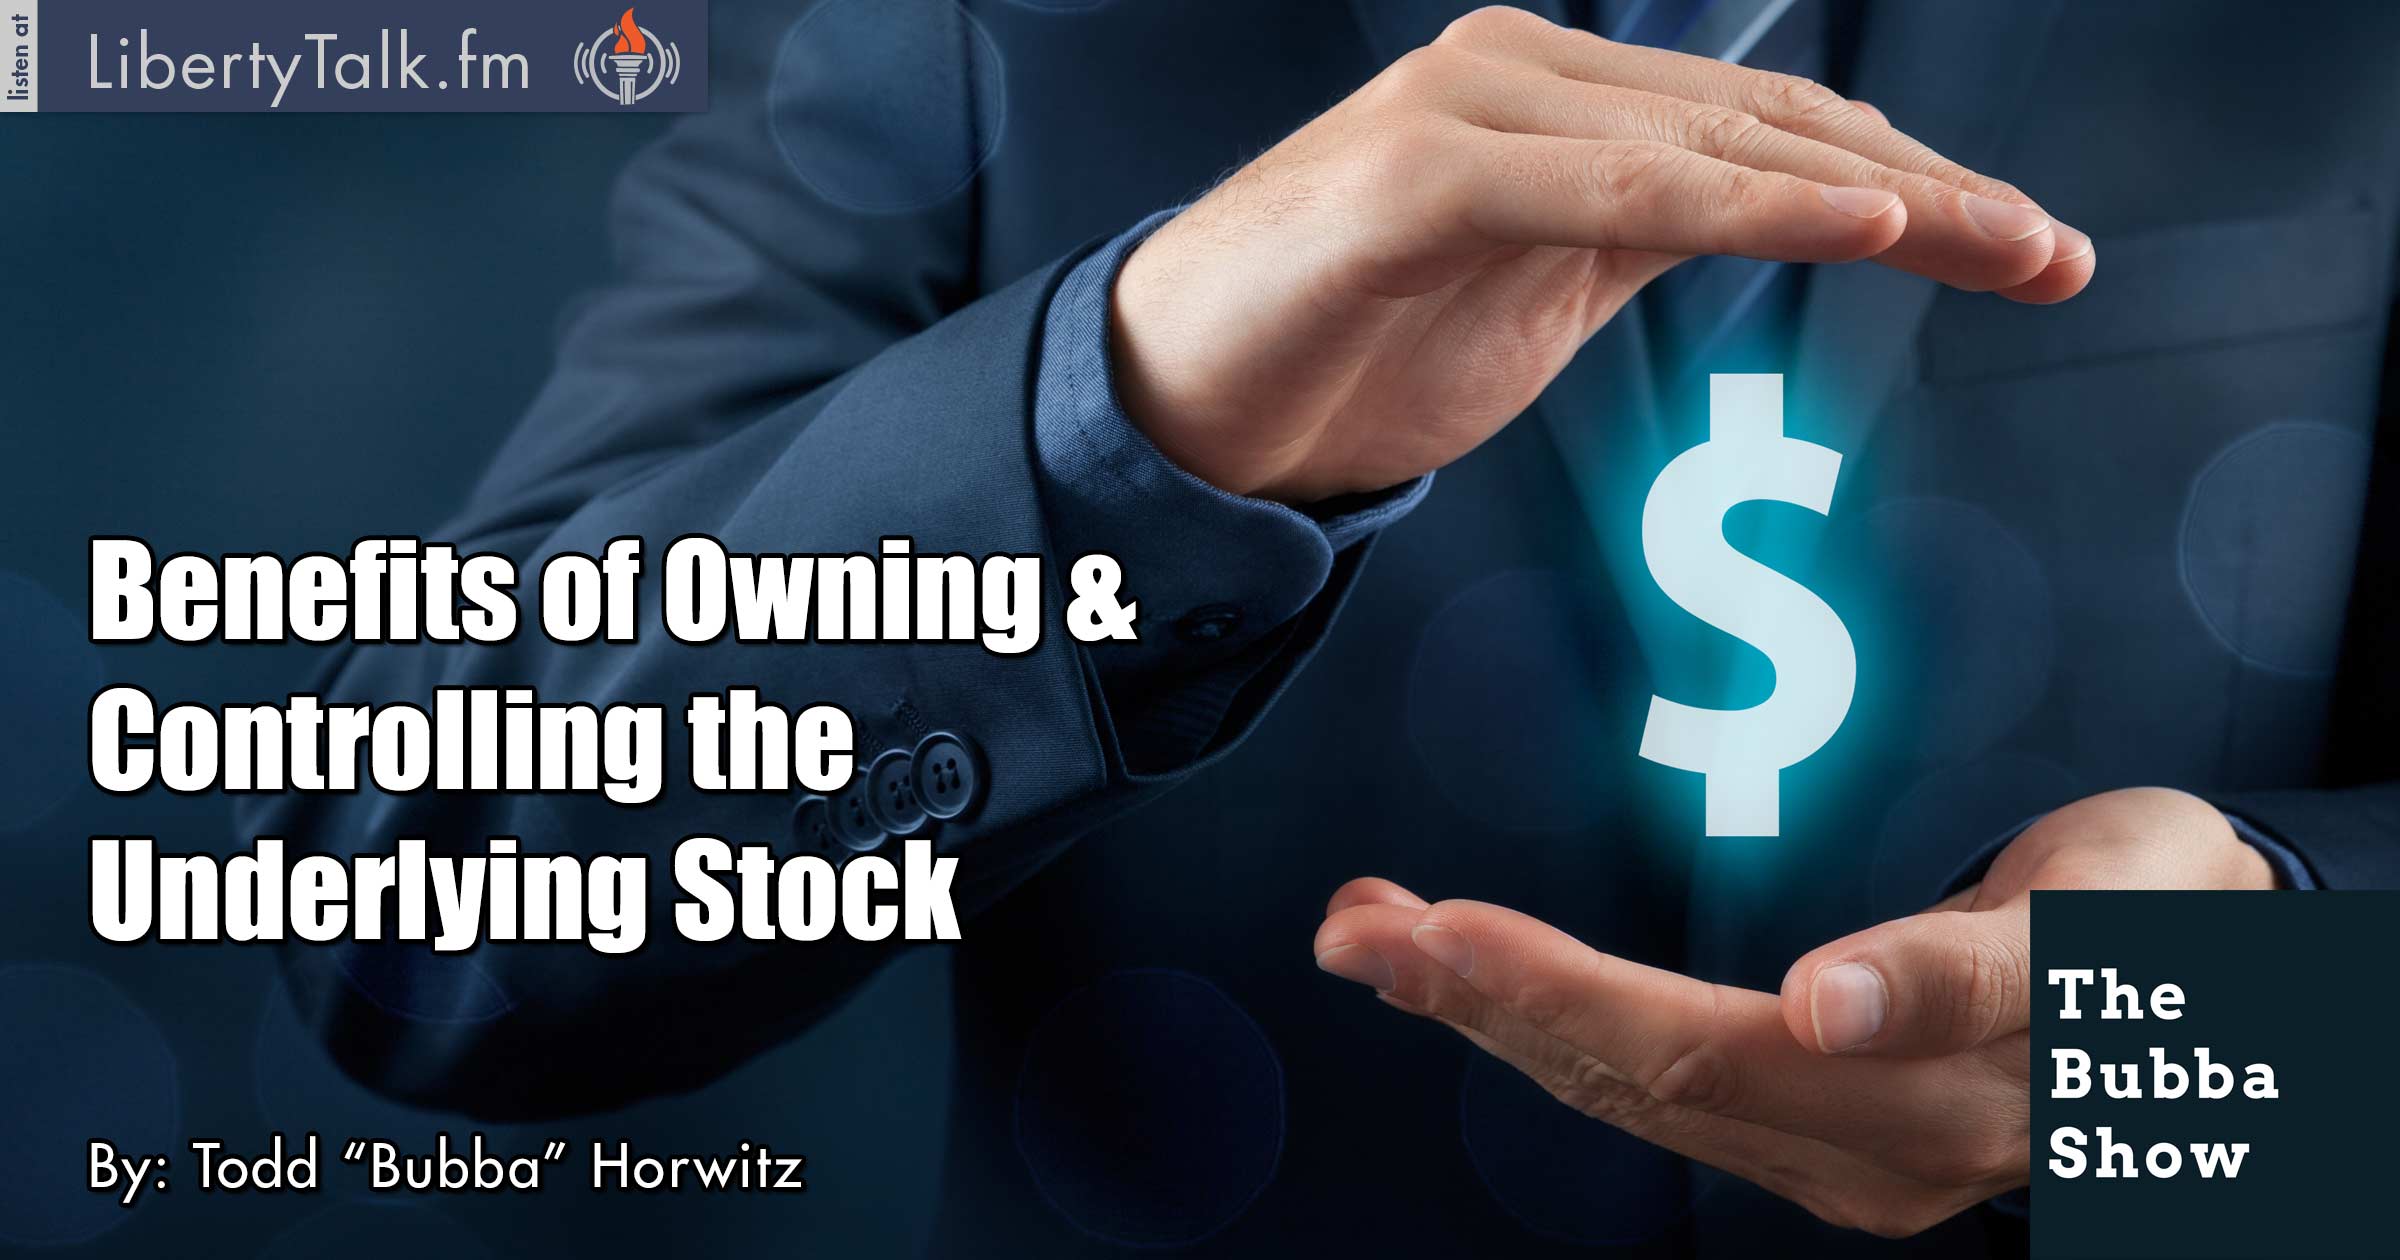 Benefits of Owning & Controlling the Underlying Stock - The Bubba Show